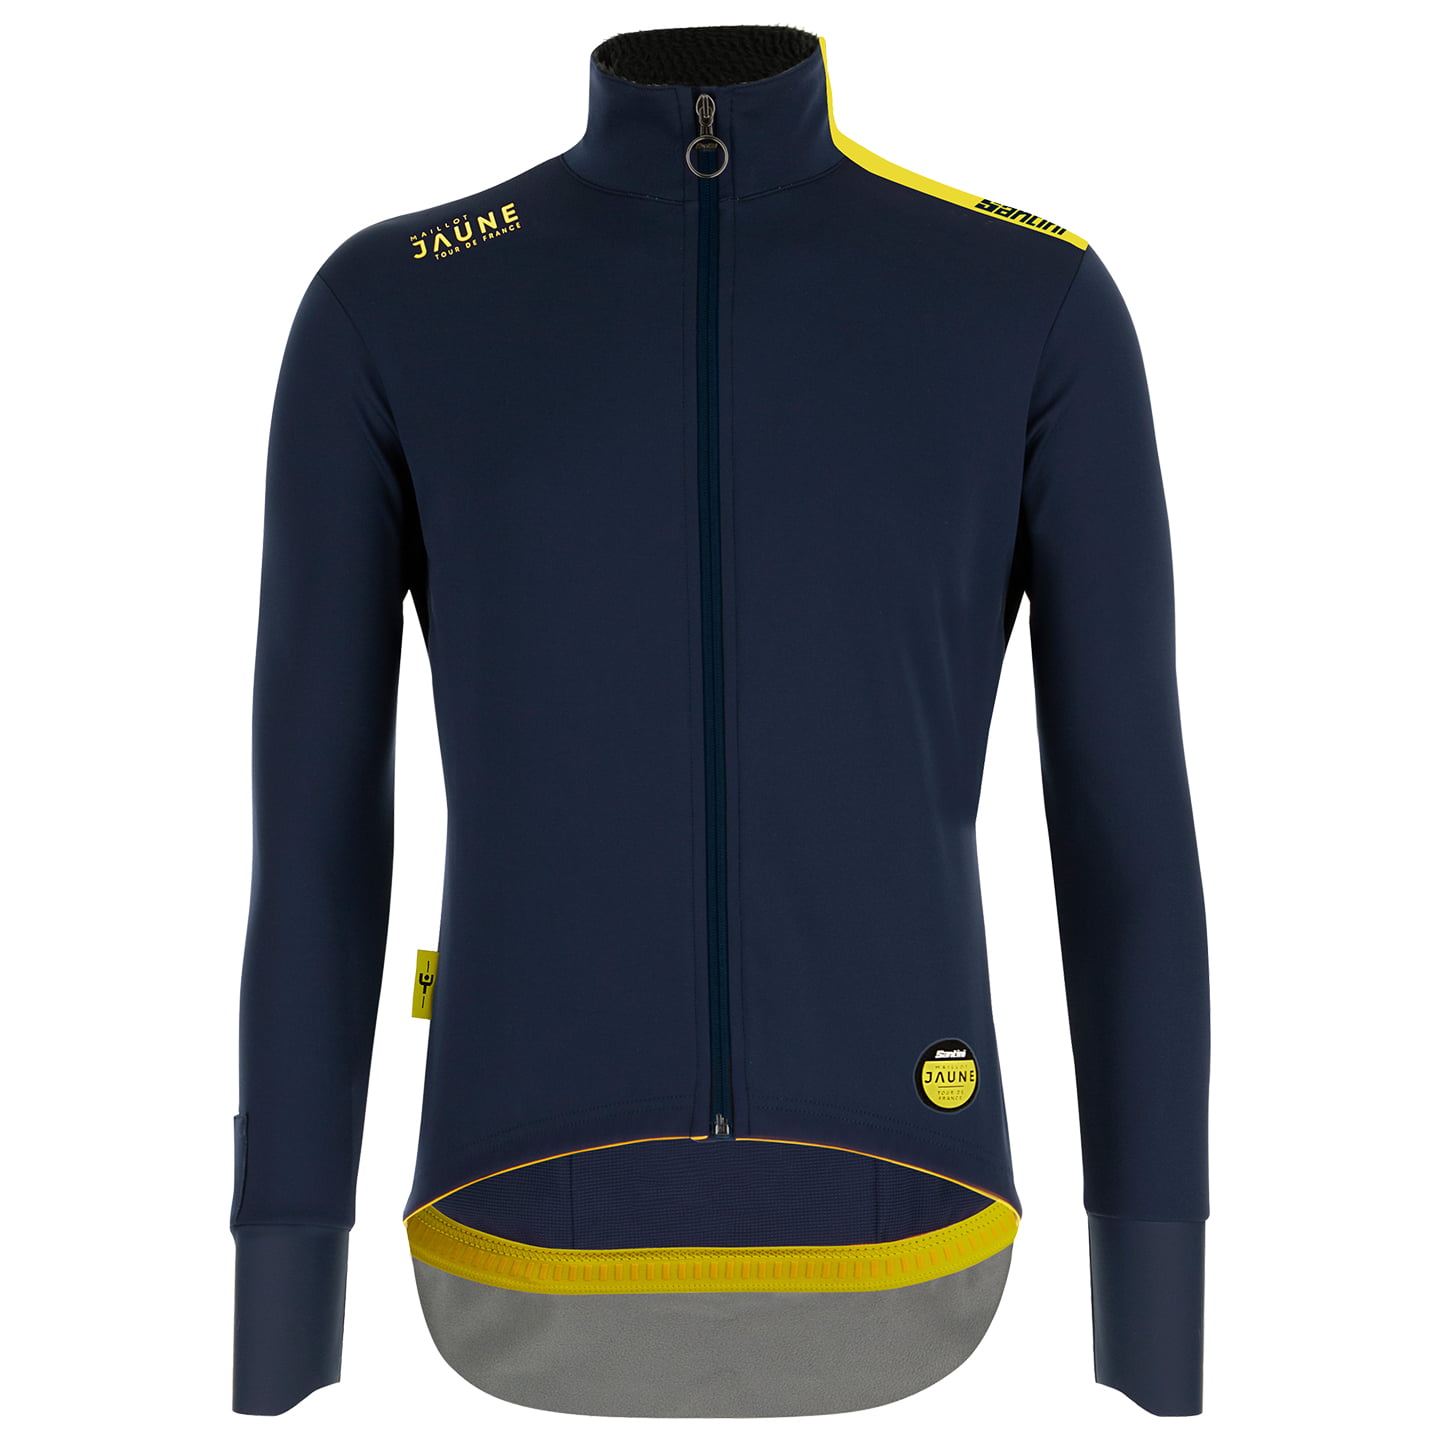 TOUR DE FRANCE Winter Jacket Le Maillot Jaune 2022 Thermal Jacket, for men, size S, Winter jacket, Cycling clothing